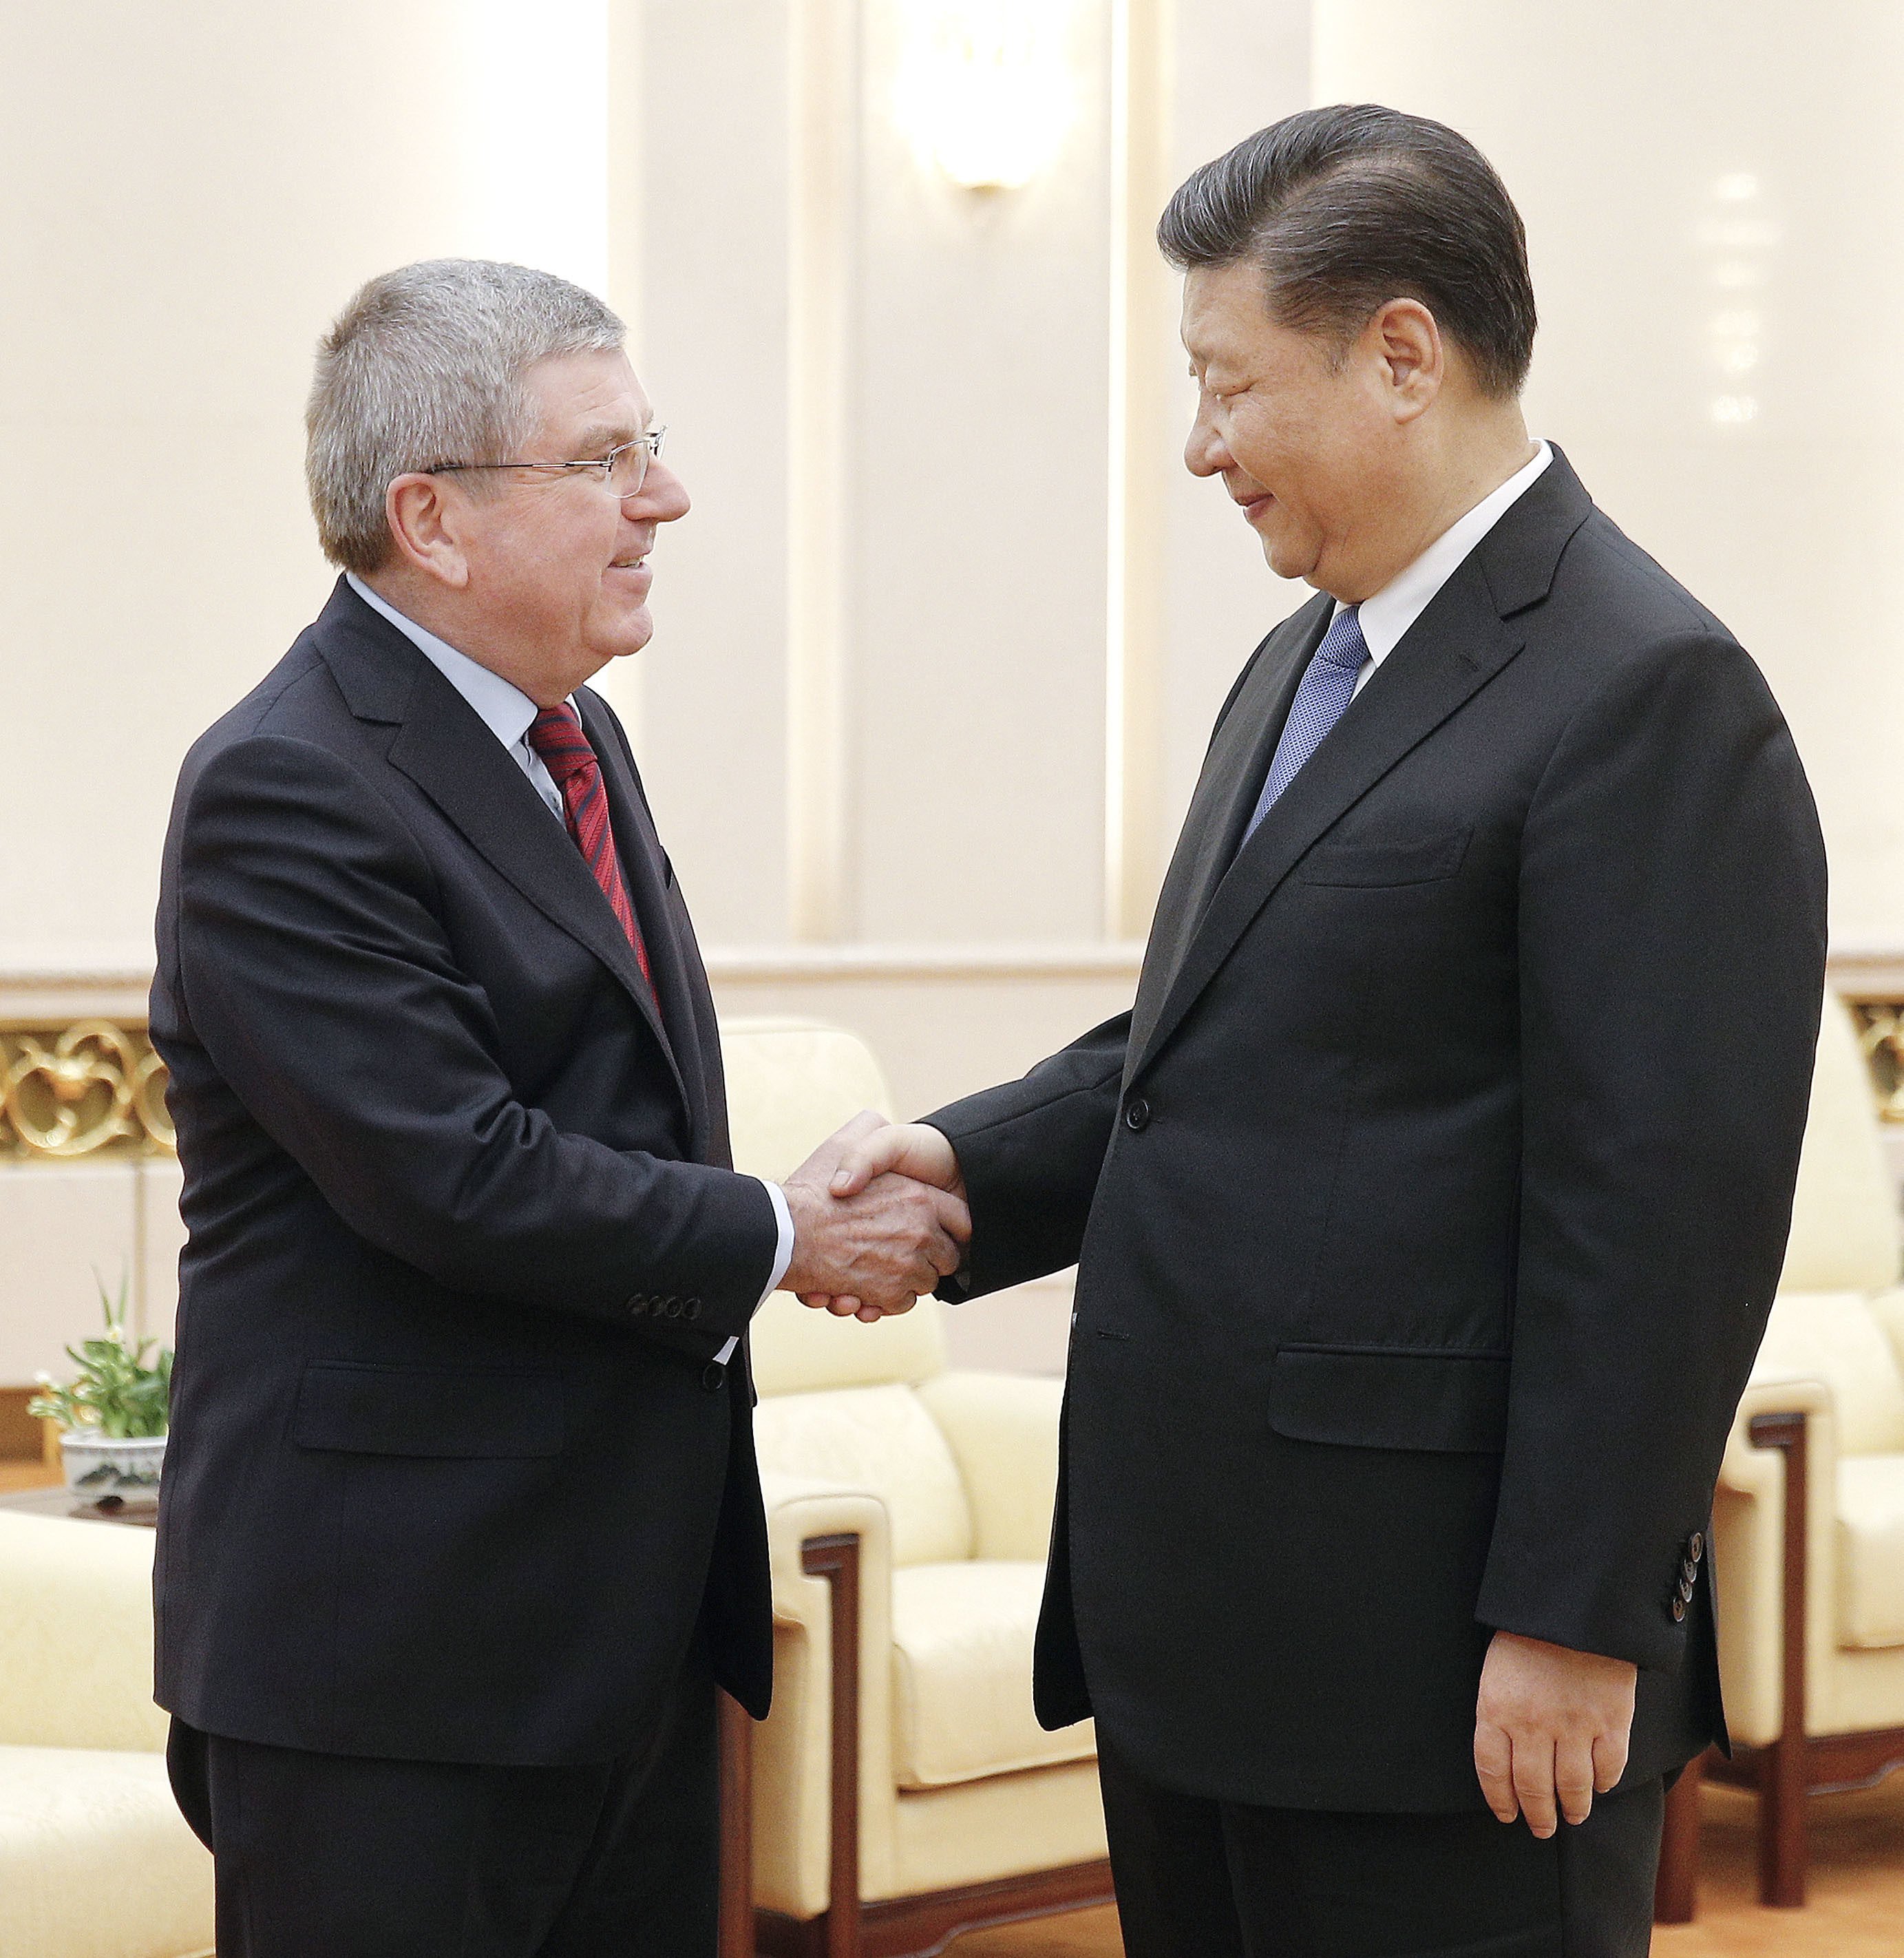 International Olympic Committee president Thomas Bach (left) and Chinese President Xi Jinping shake hands before their talks at the Great Hall of the People, ahead of the 2022 Beijing Winter Games. Photo: Kyodo